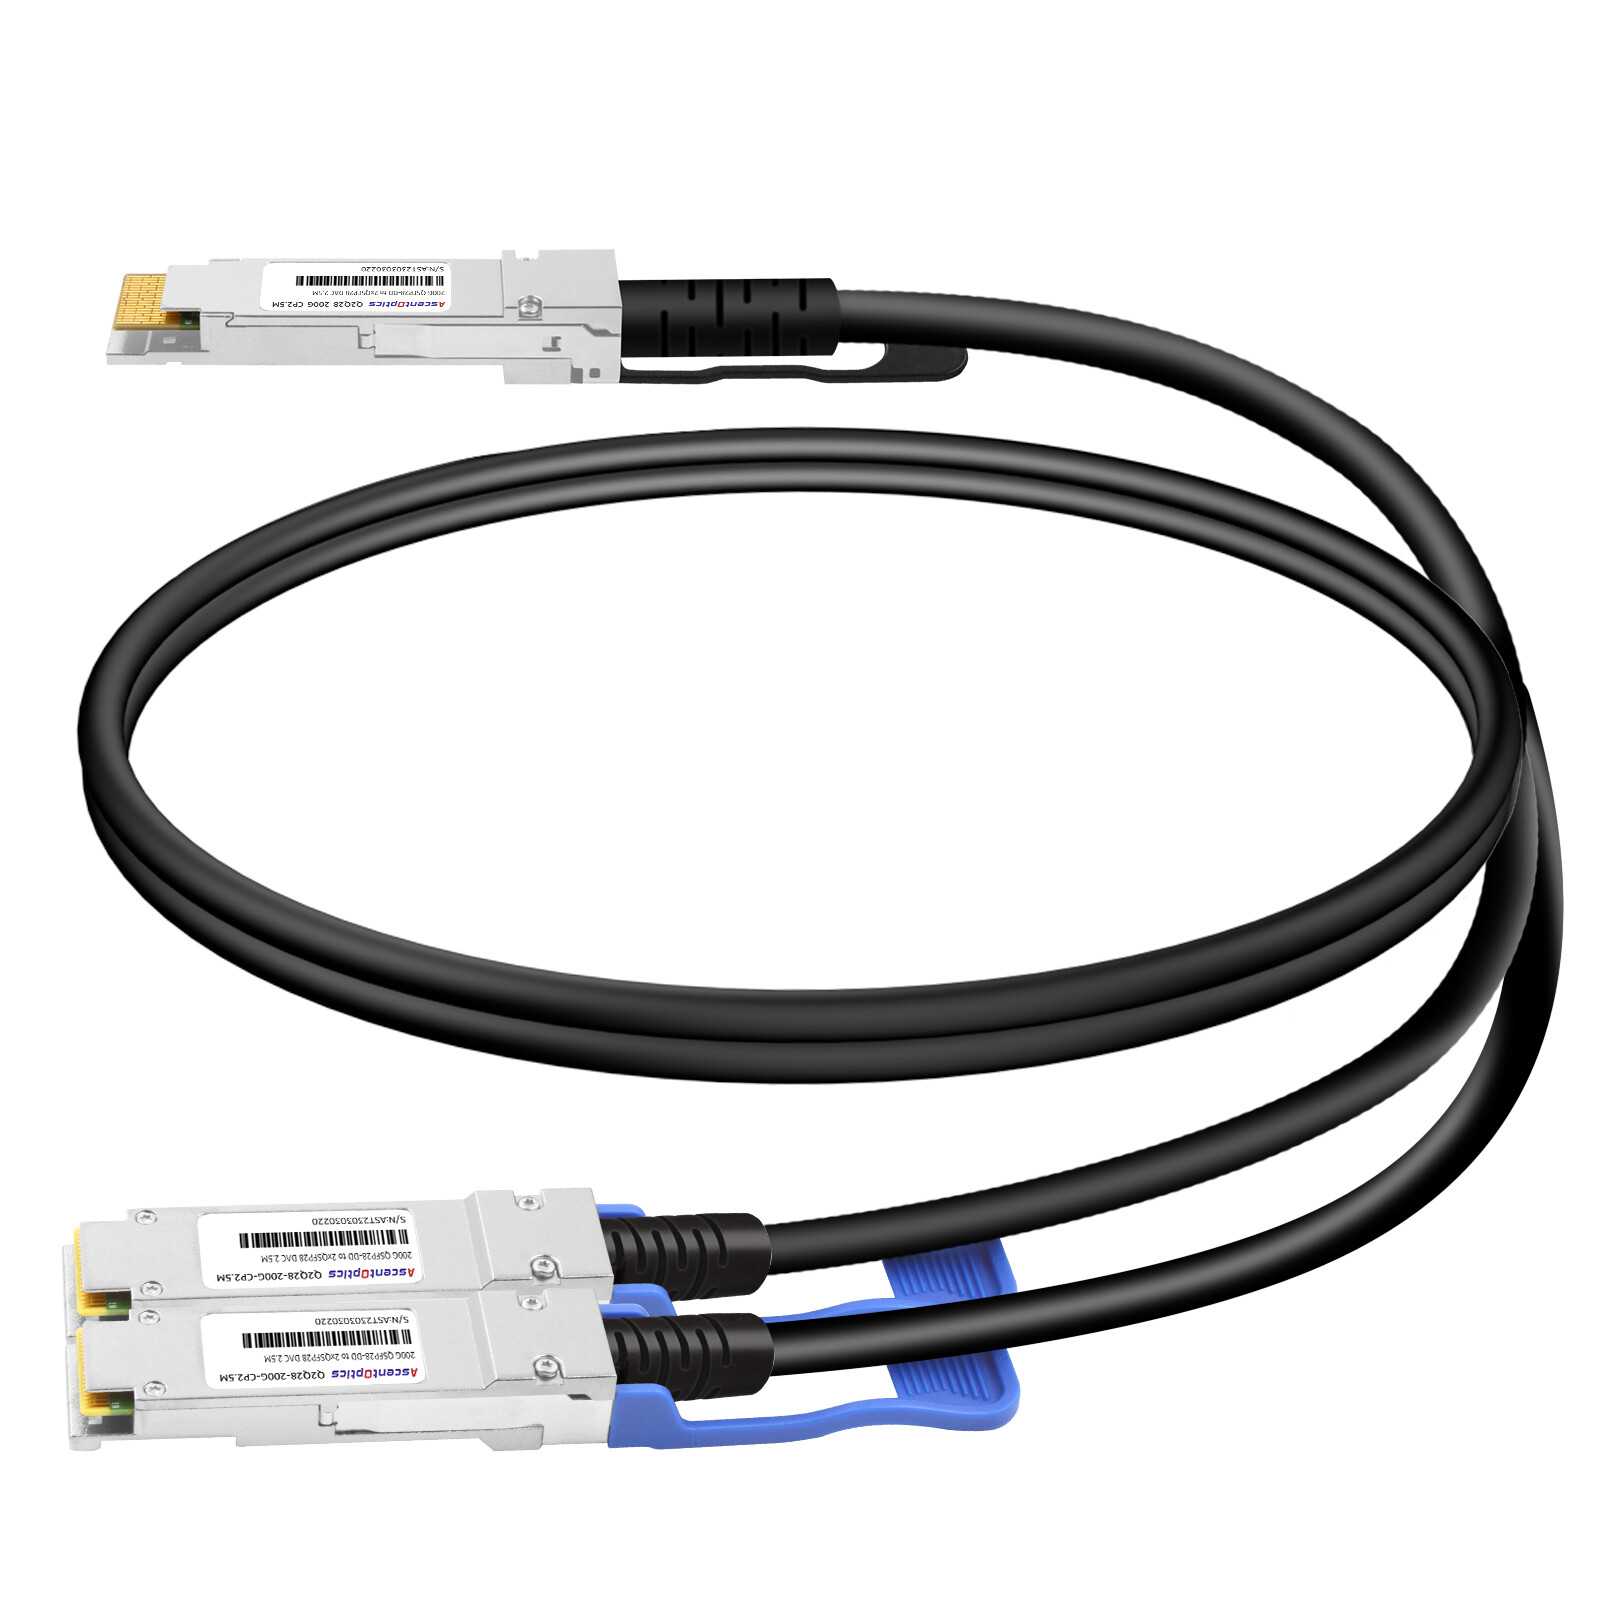 200G QSFP28-DD to 2x 100G QSFP28 Copper Breakout Cable,2.5 Meters,Passive